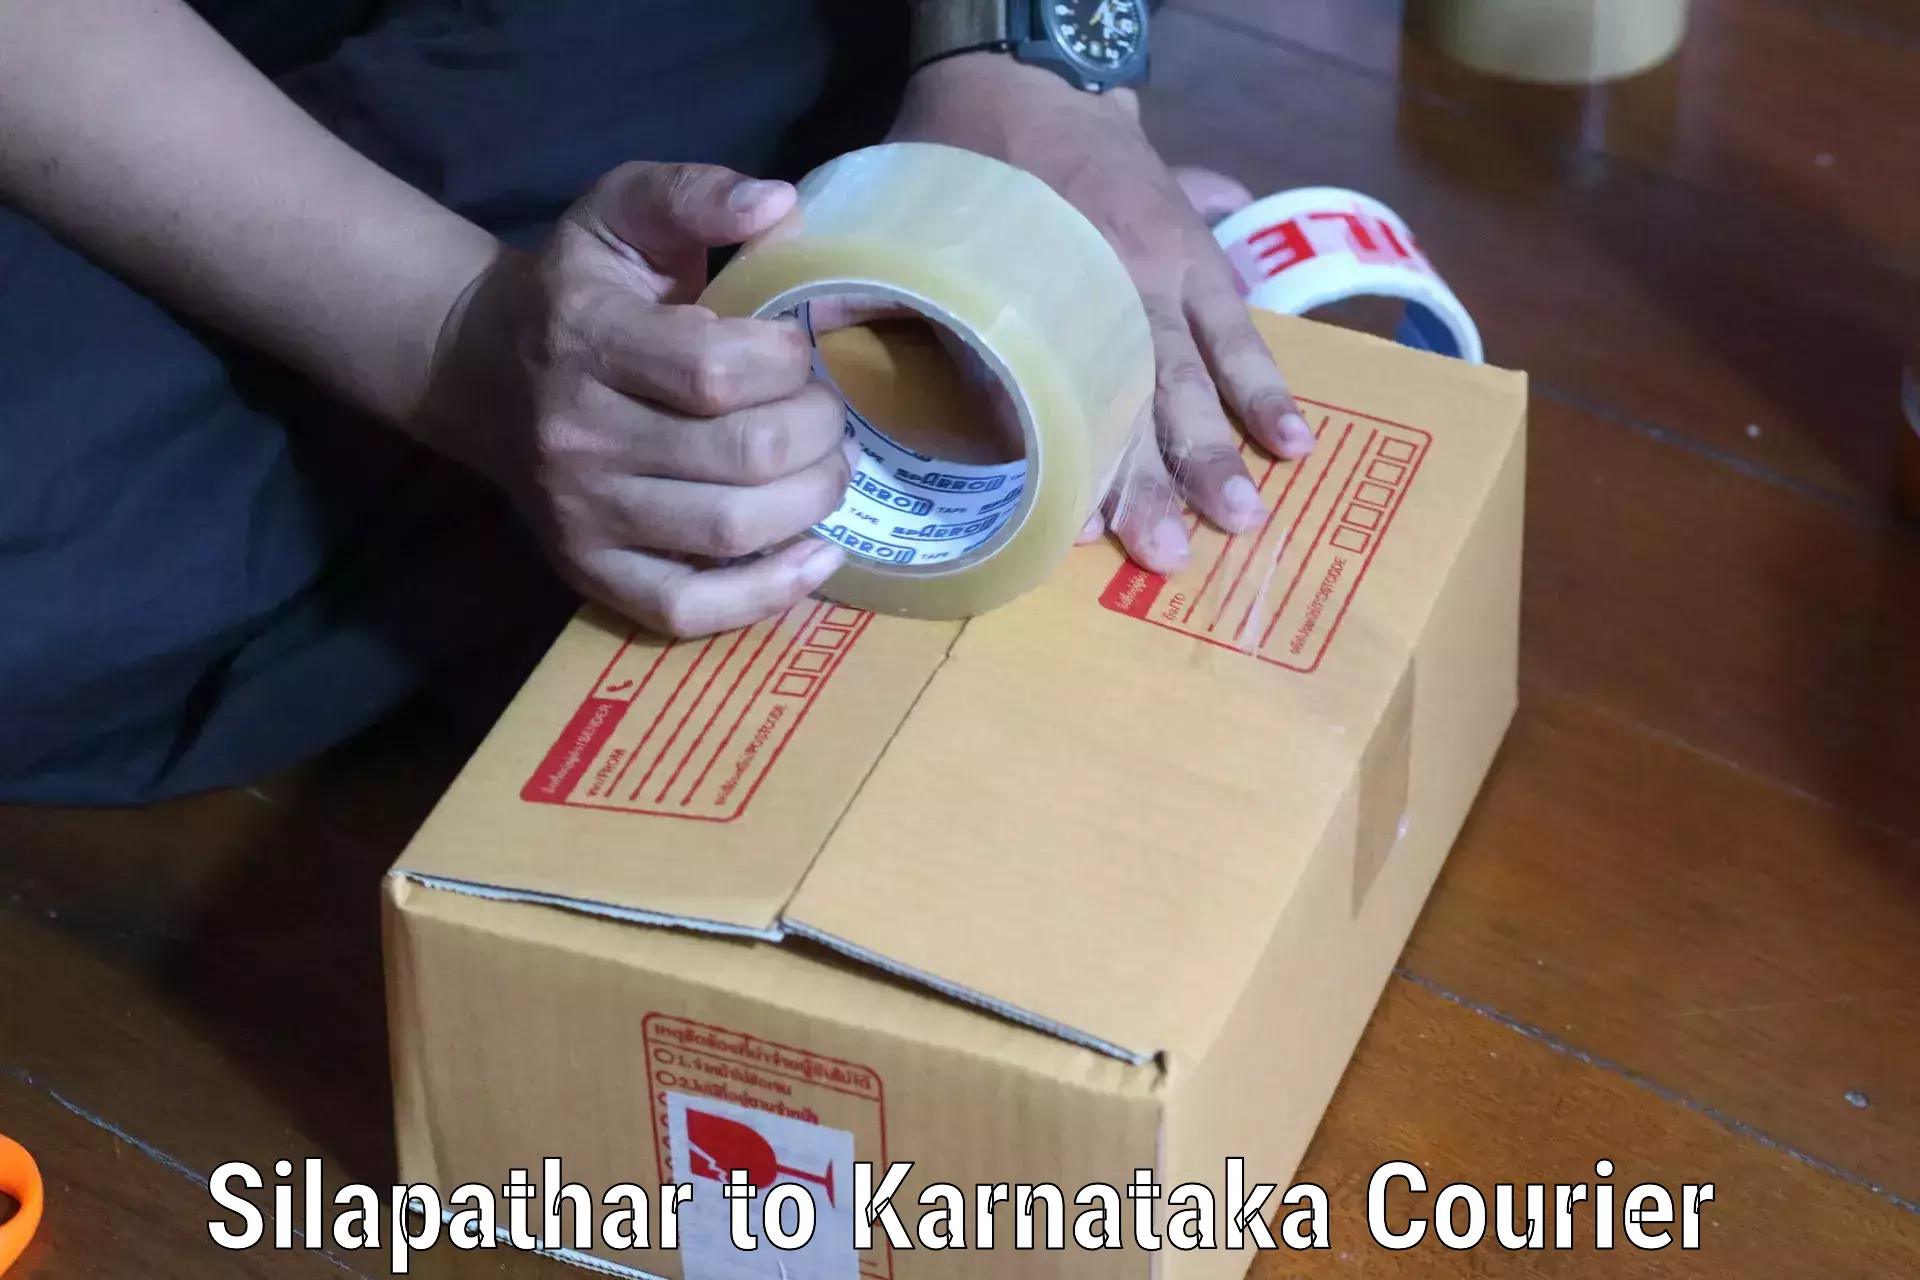 Expedited shipping methods Silapathar to Gubbi